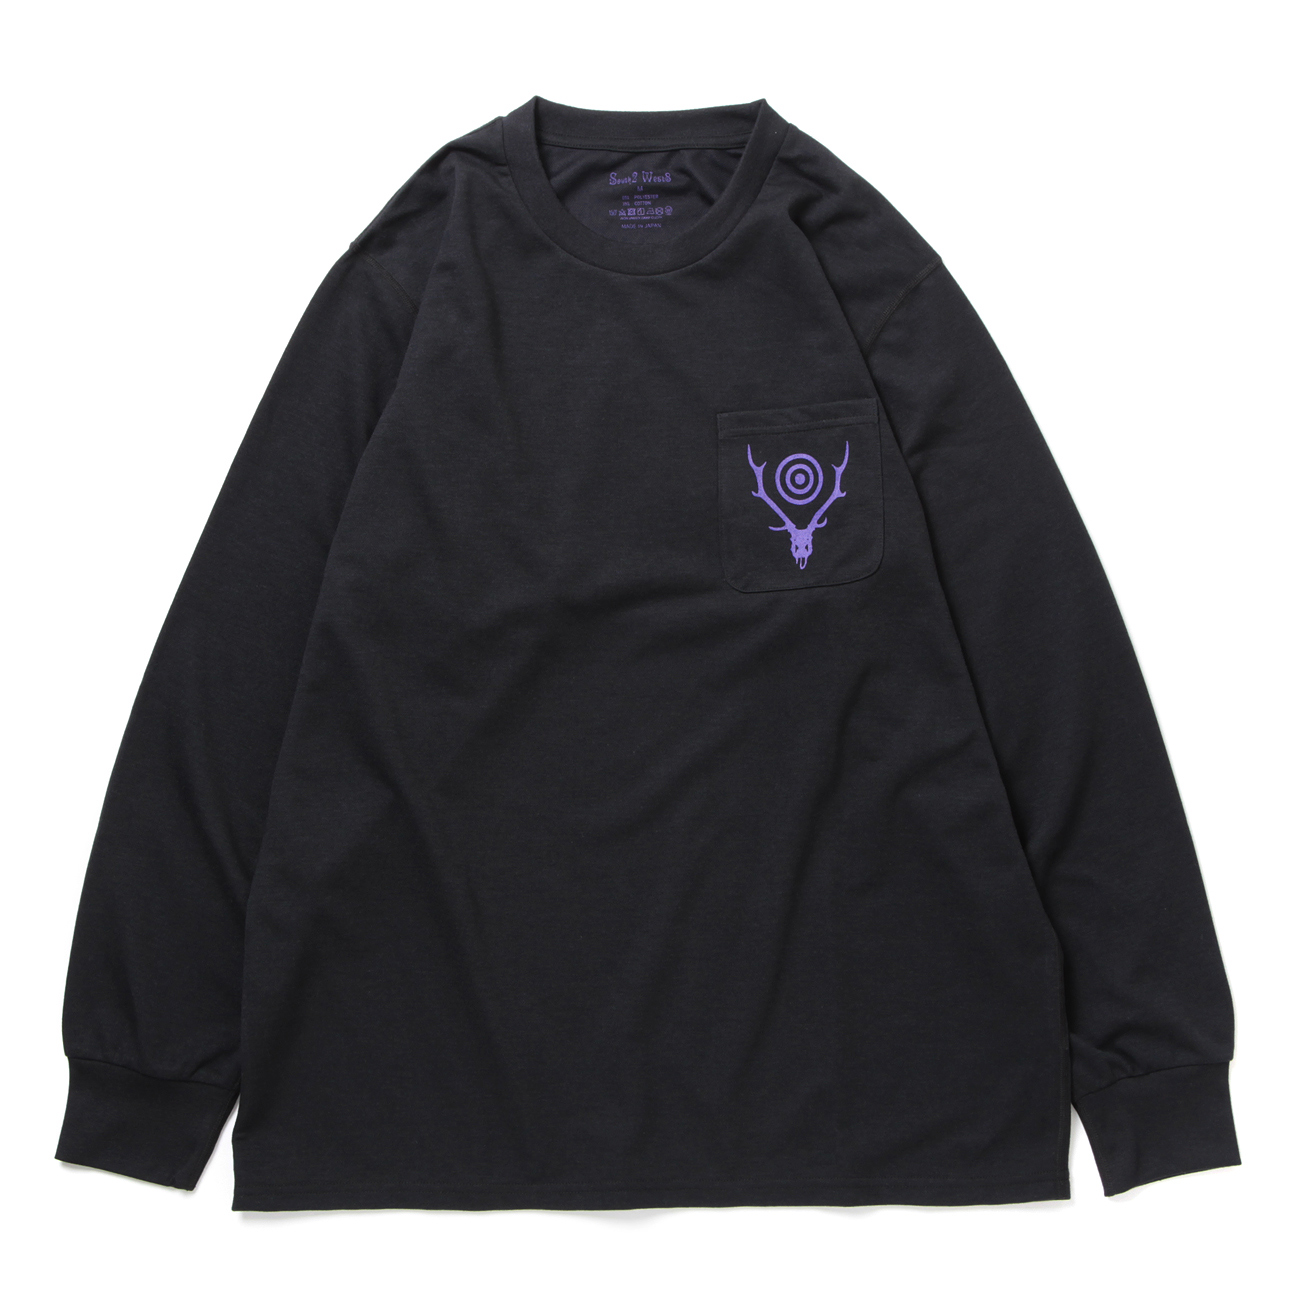 South2 West8 / サウスツーウエストエイト | L/S Round Pocket Tee